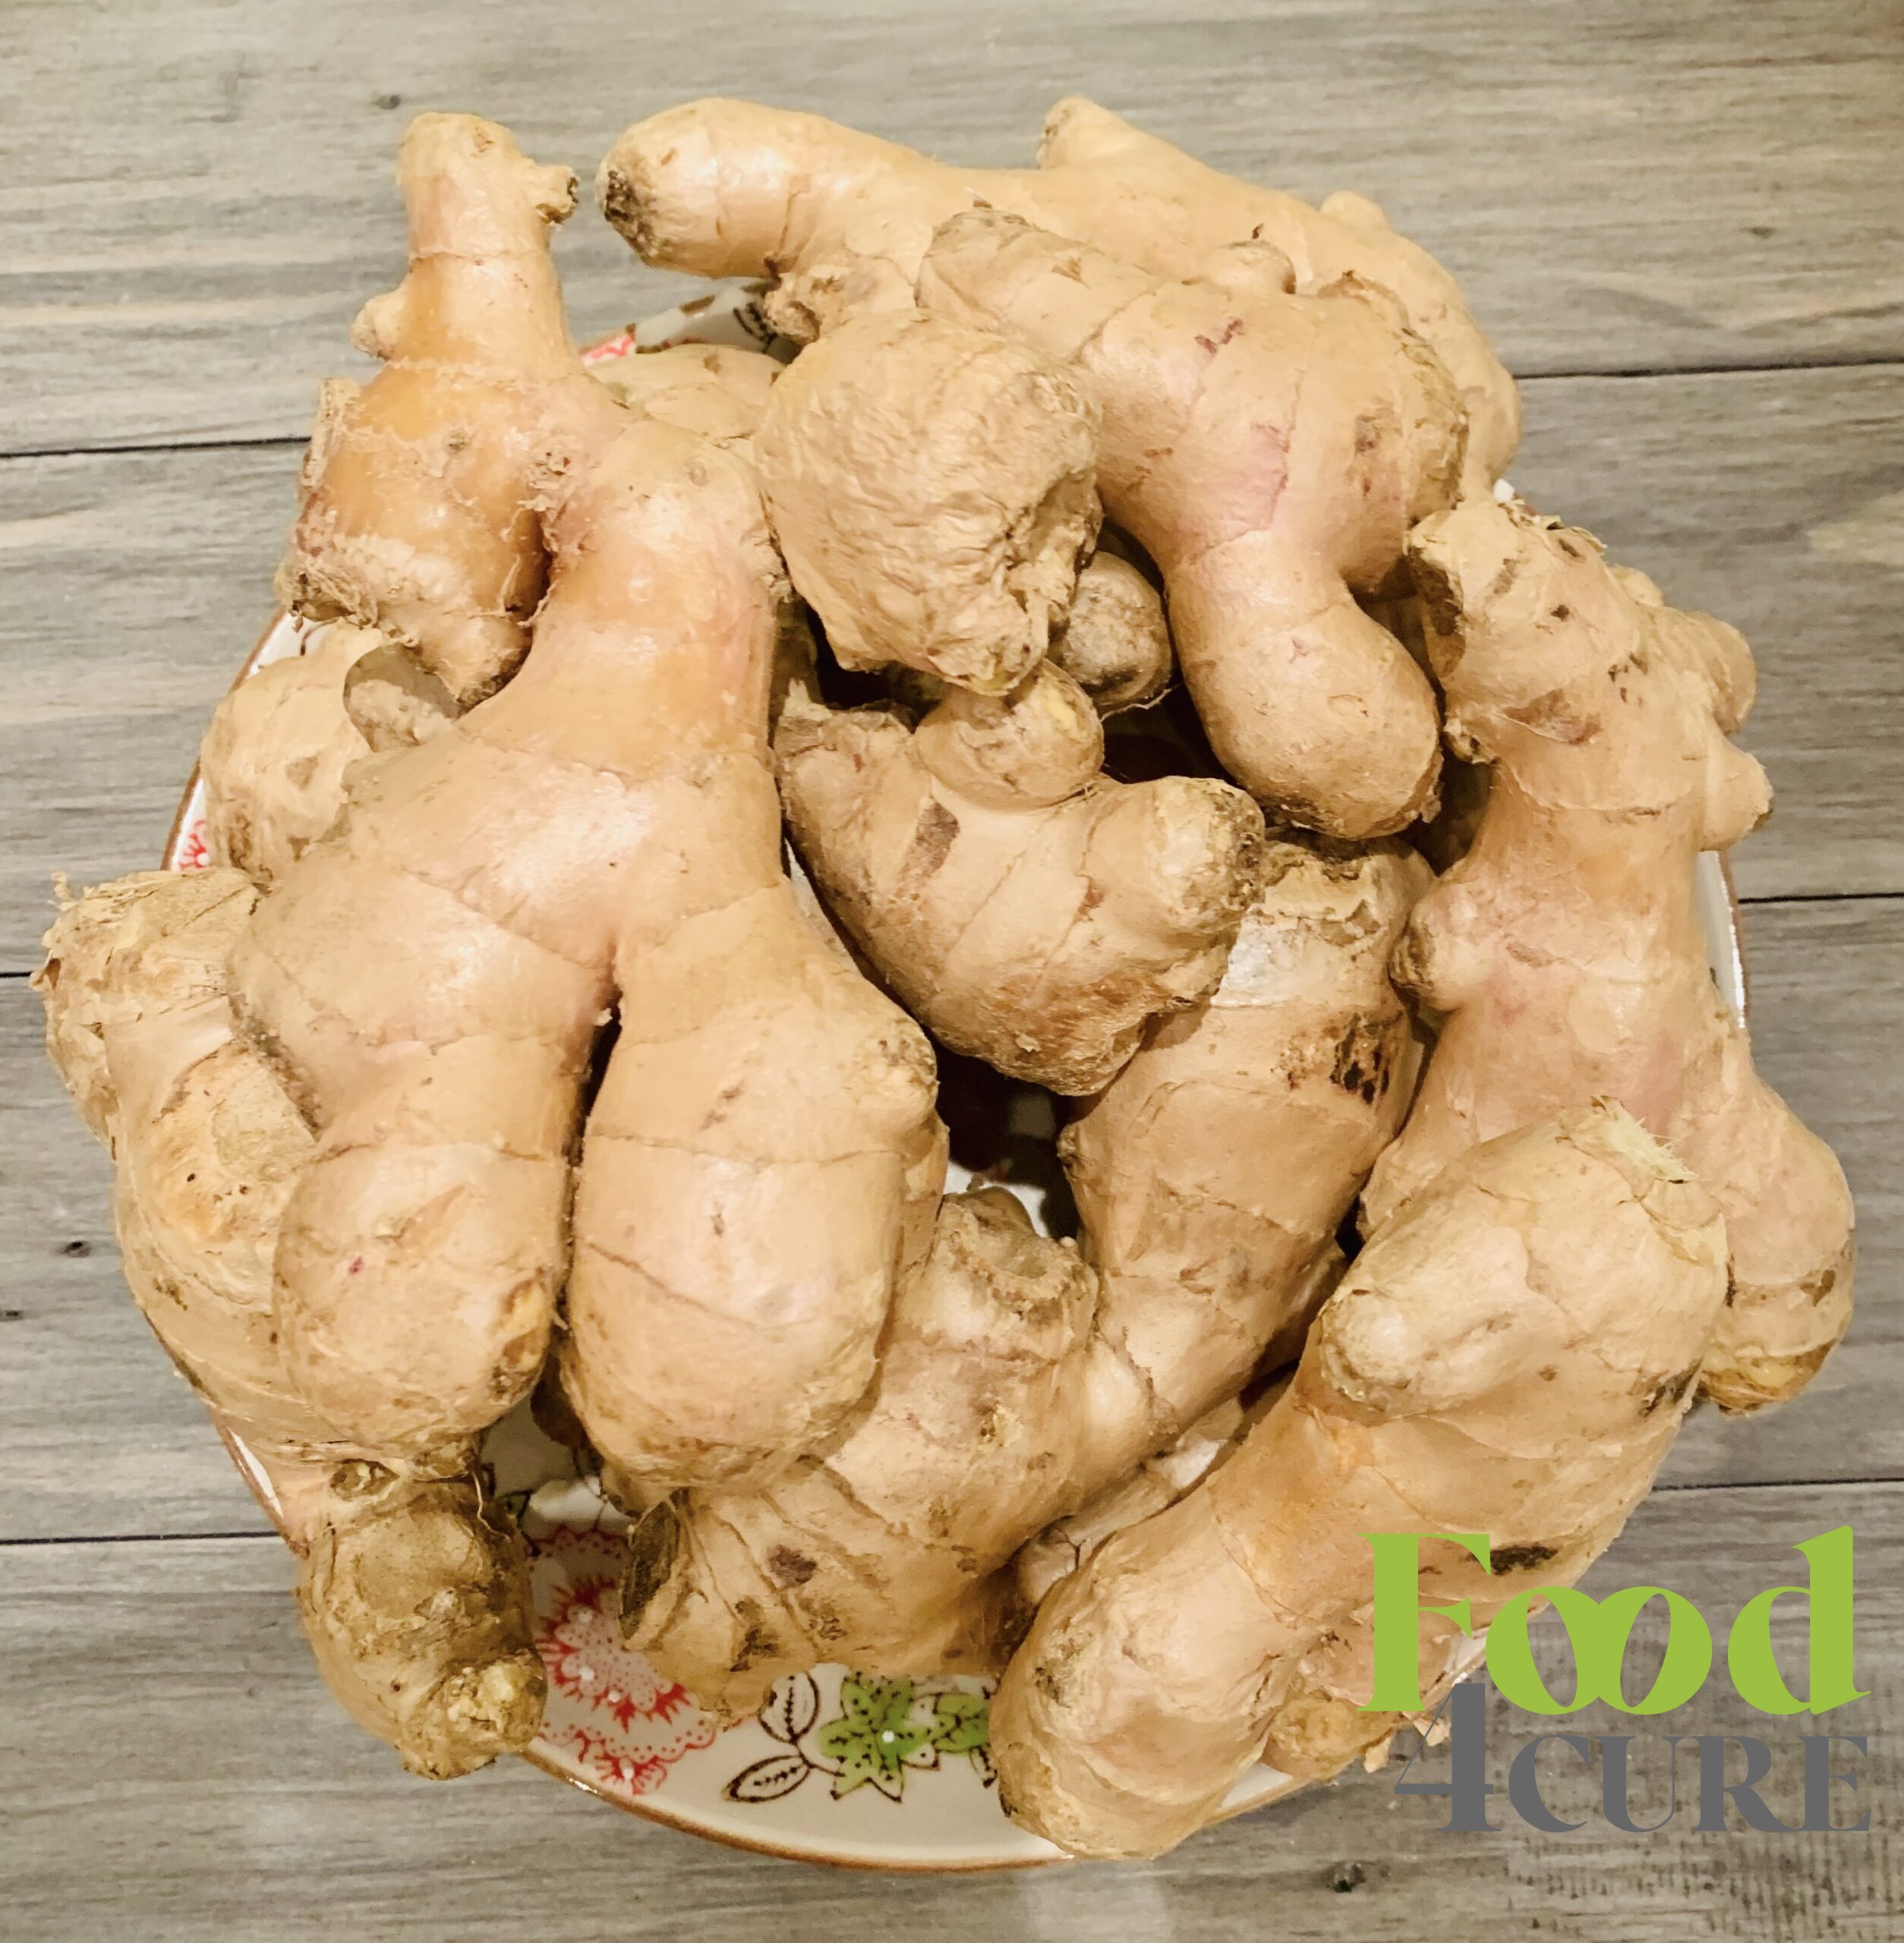 Spice Up Your Morning Routine: Add Ginger to Your Water for a Refreshing Twist!